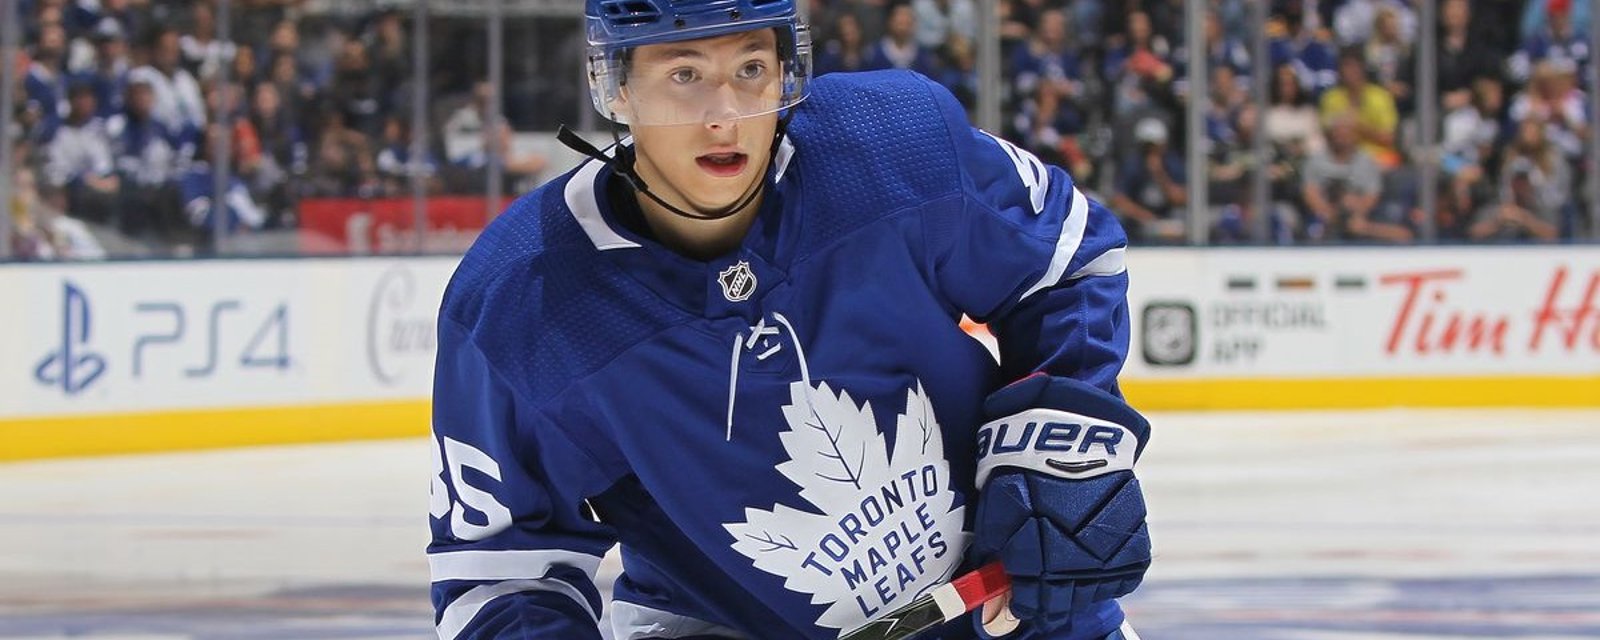 Maple Leafs promote young forward to main roster.